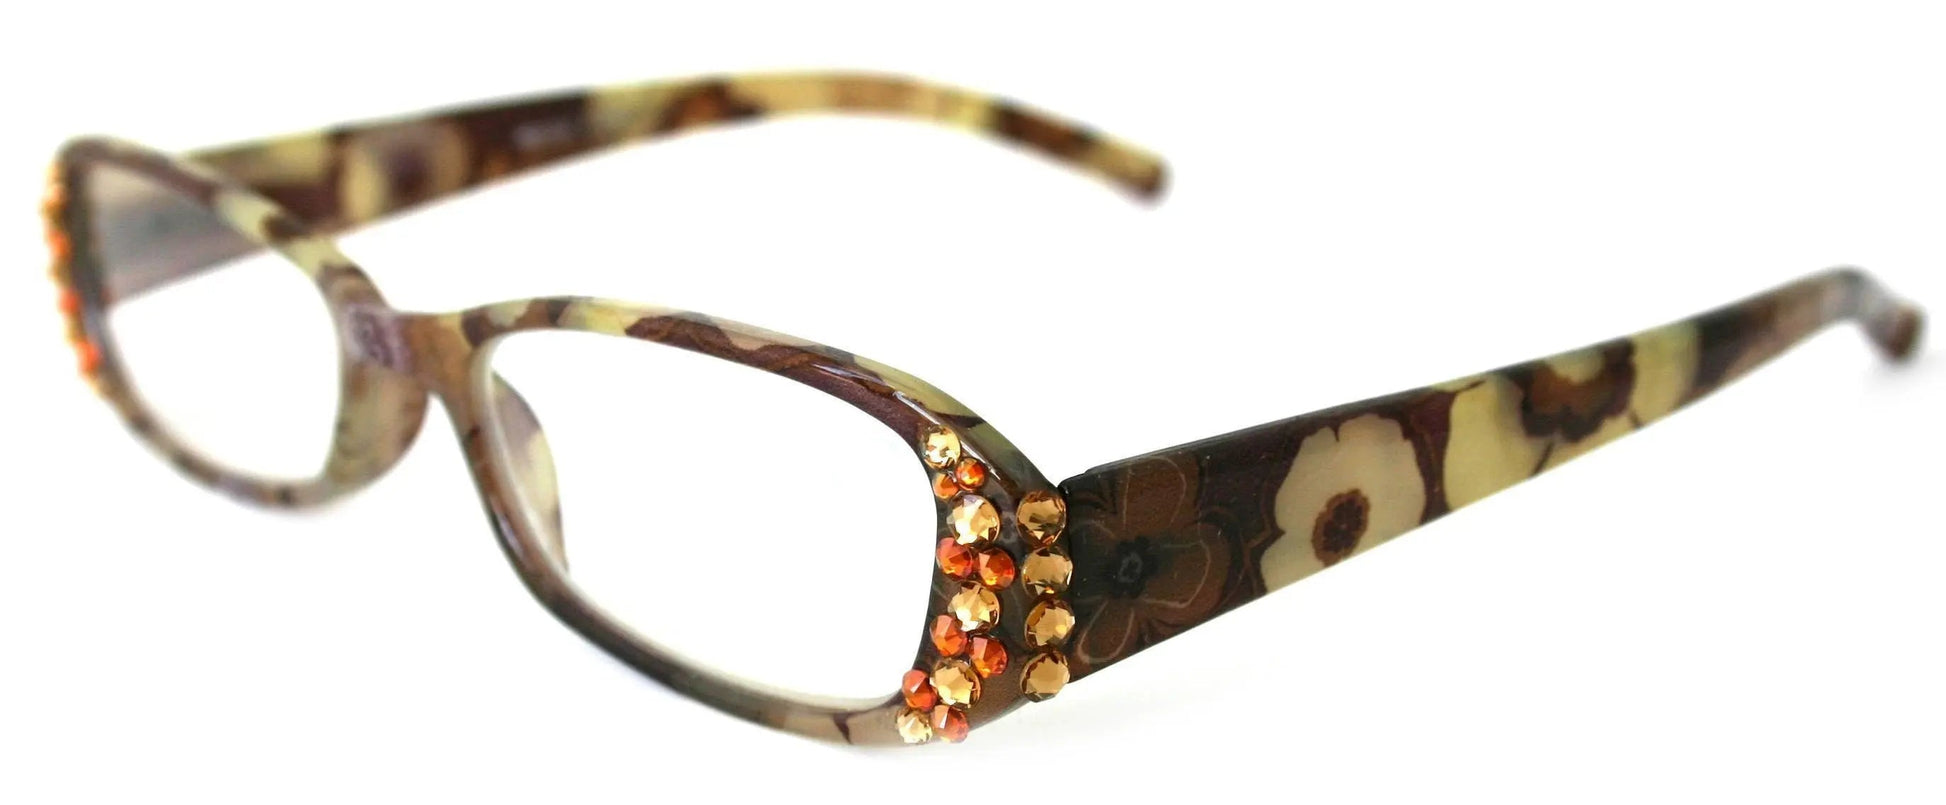 Blossom, (Bling) Reading Glasses for Women W (Light Colorado, Cooper)    +1.50..+4 +4.50 +6 (Floral Brown) NY Fifth Avenue.